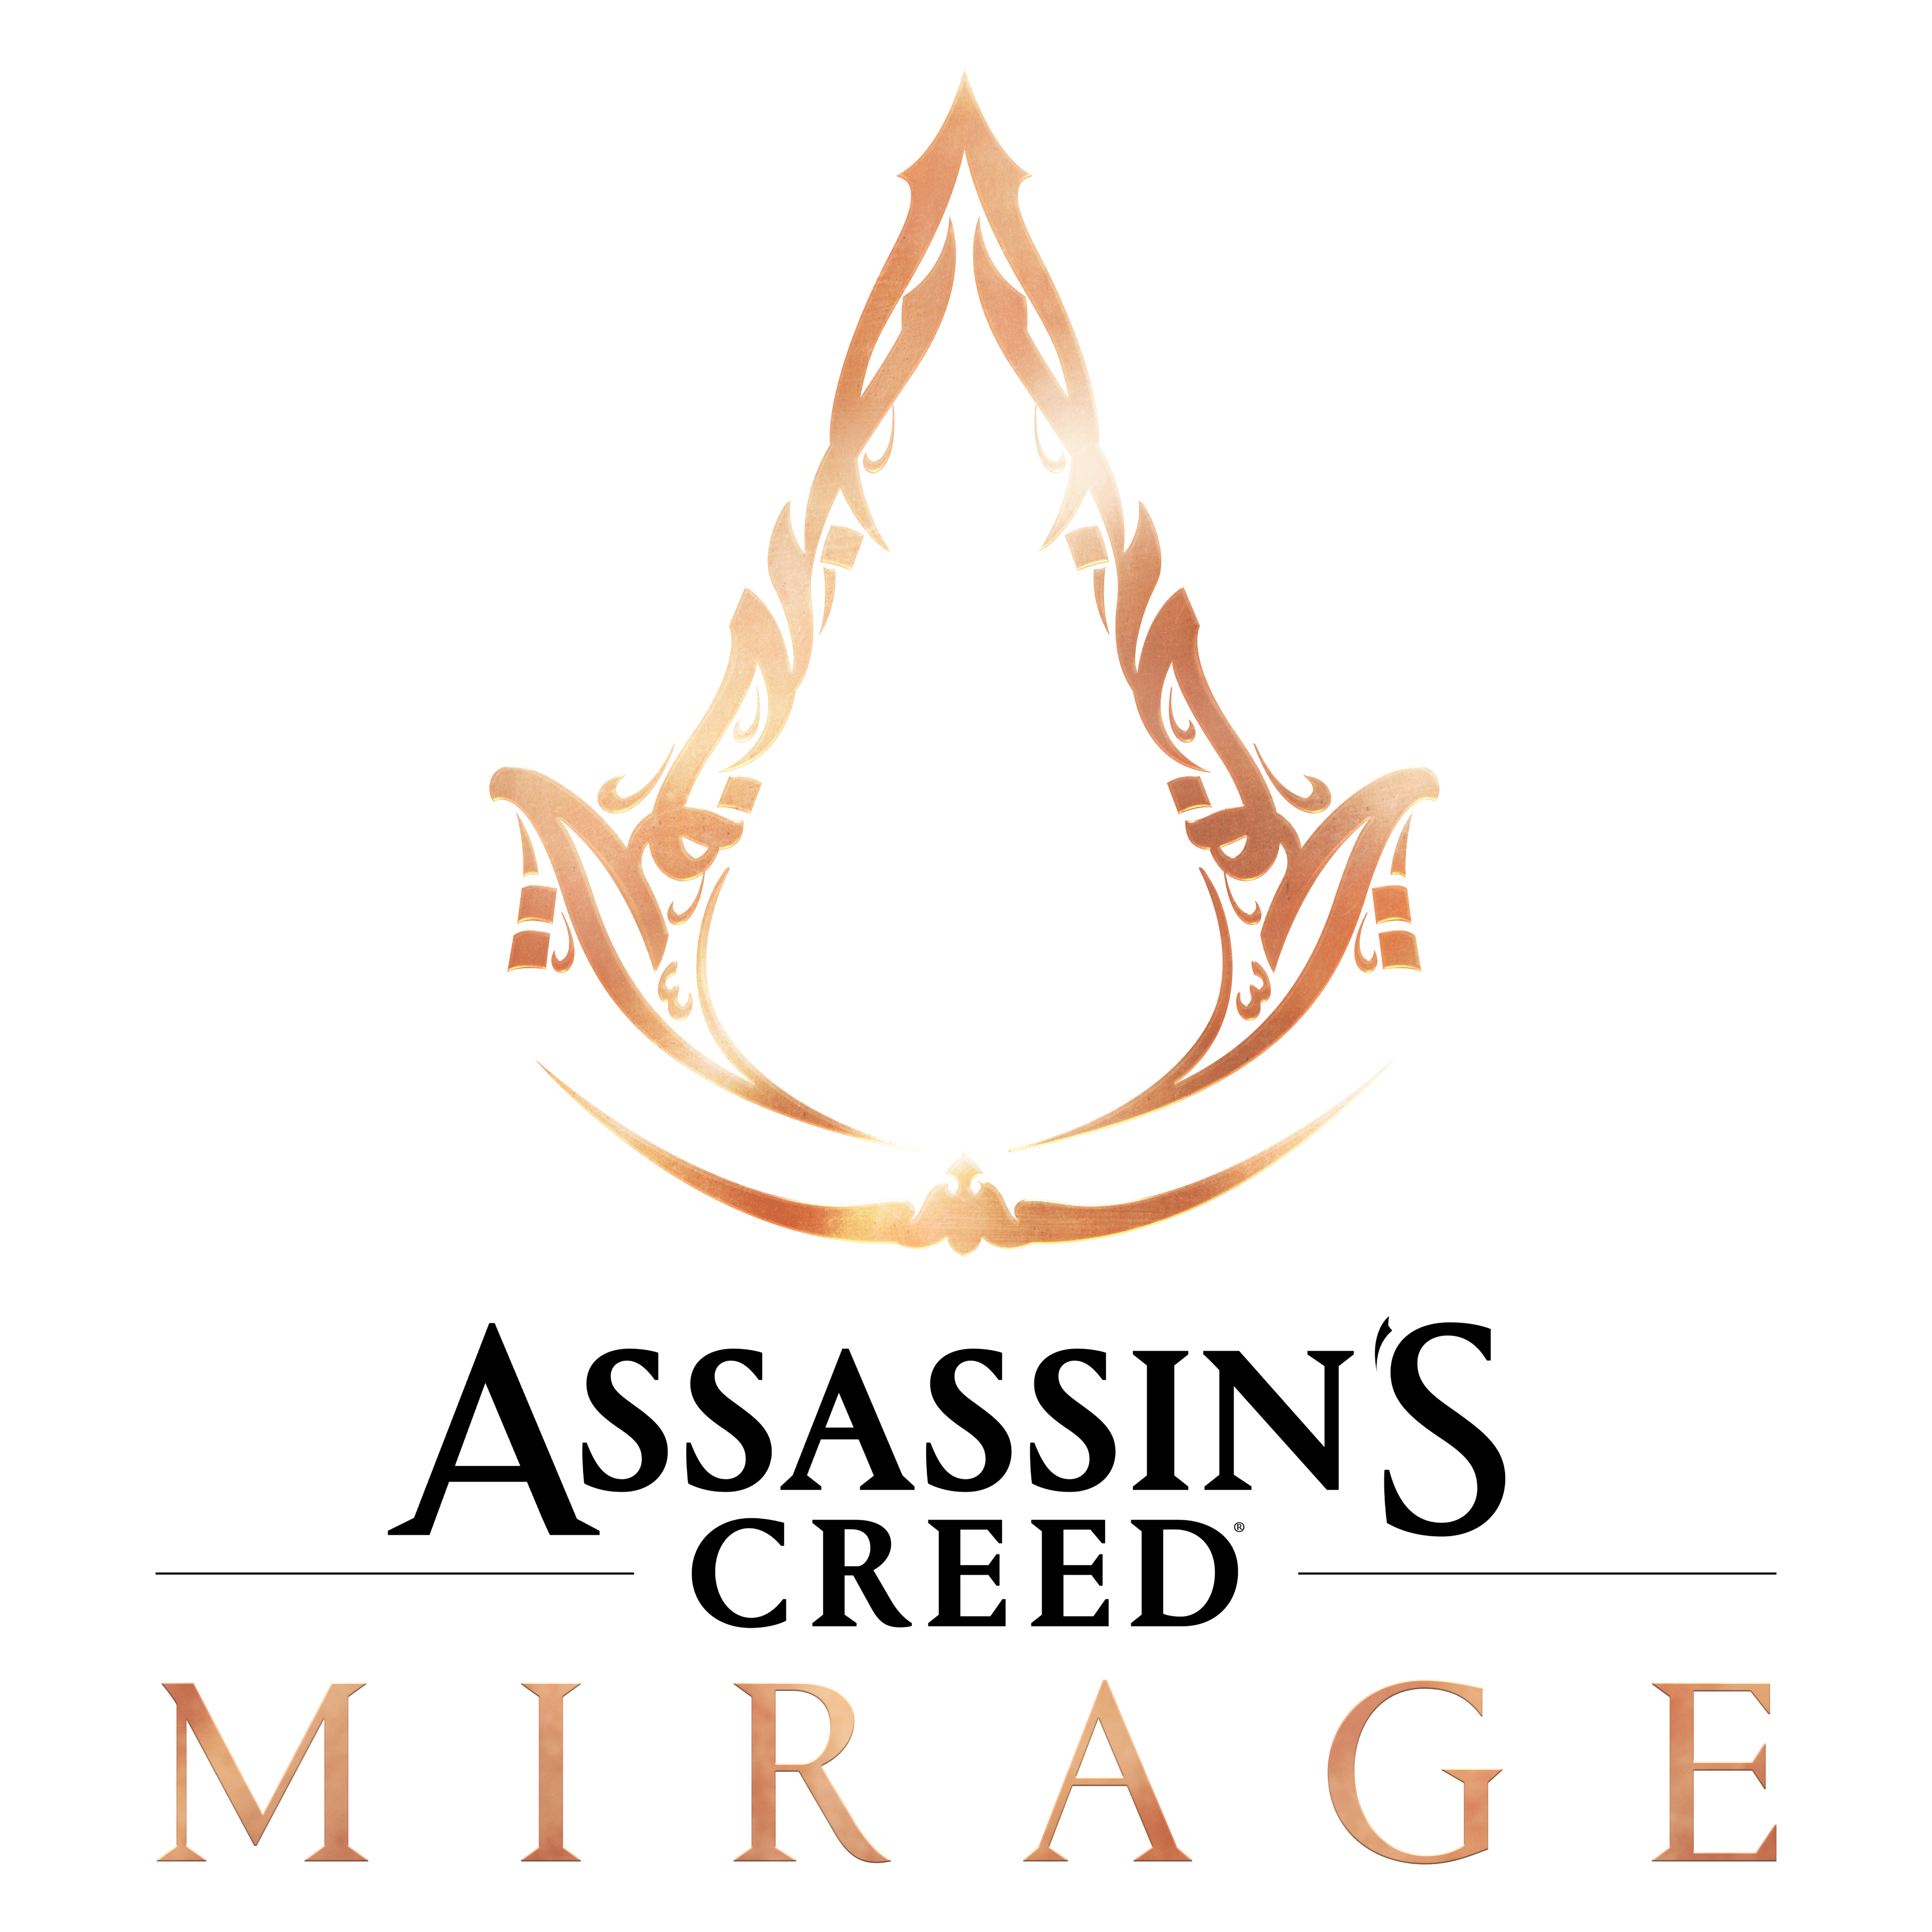 Assassin's Creed Mirage launches in 2023 for PS5, Xbox Series, PS4, Xbox  One, PC, and Luna - Gematsu